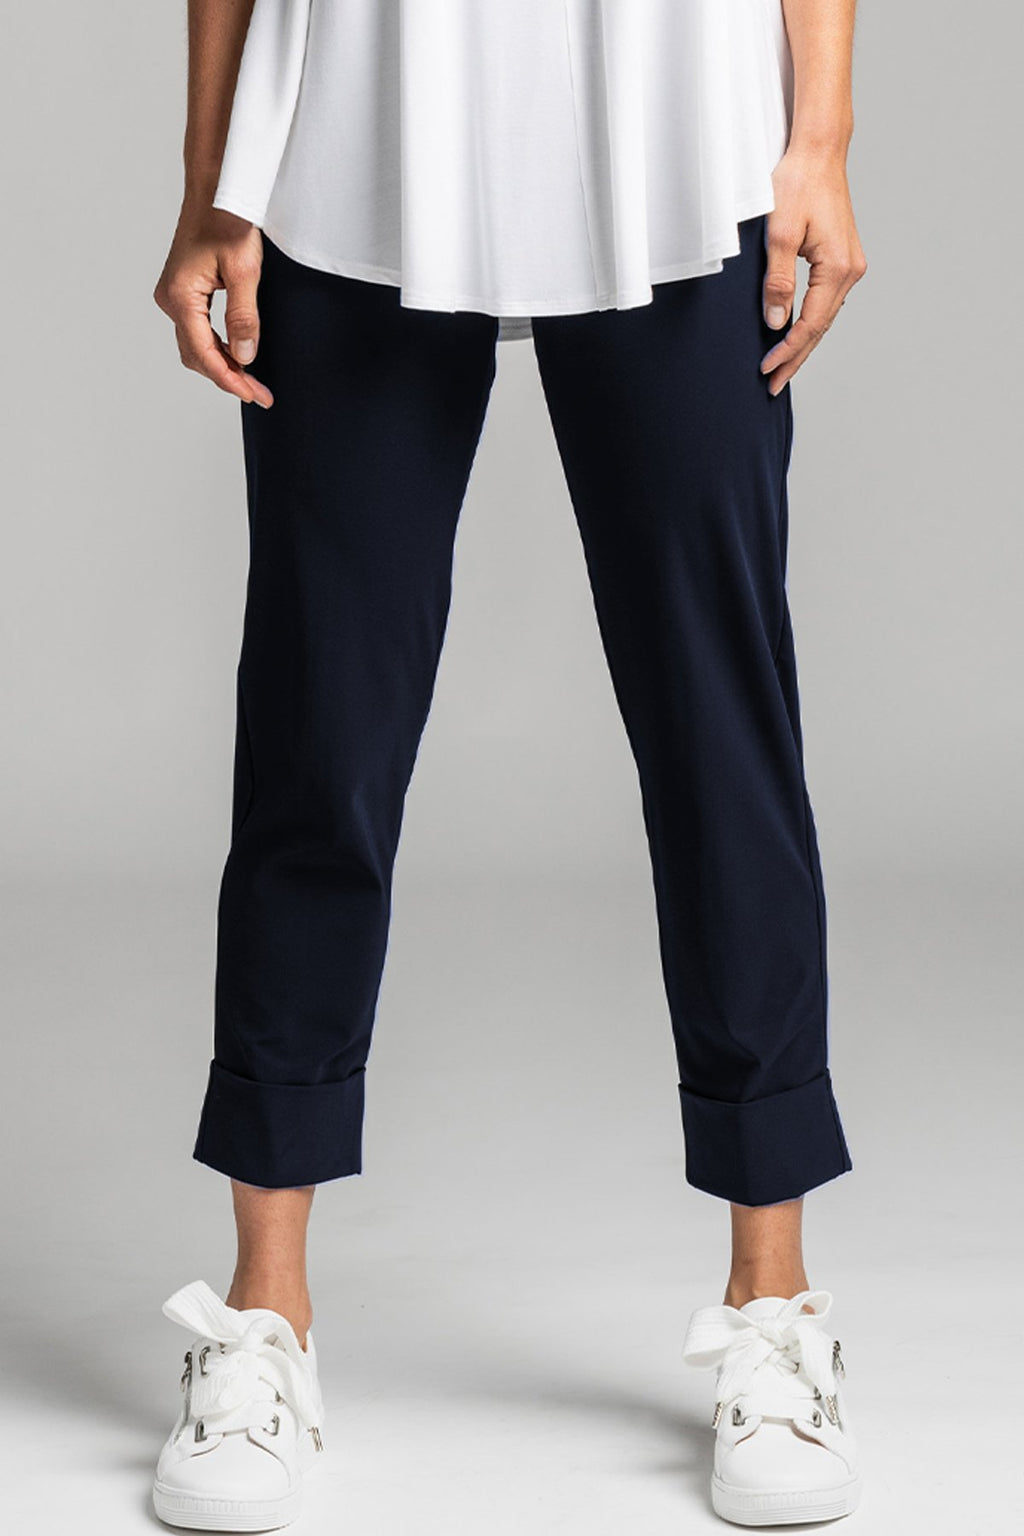 PAULA RYAN ESSENTIALS Slouched Cuffed Pant - Classic Microjersey